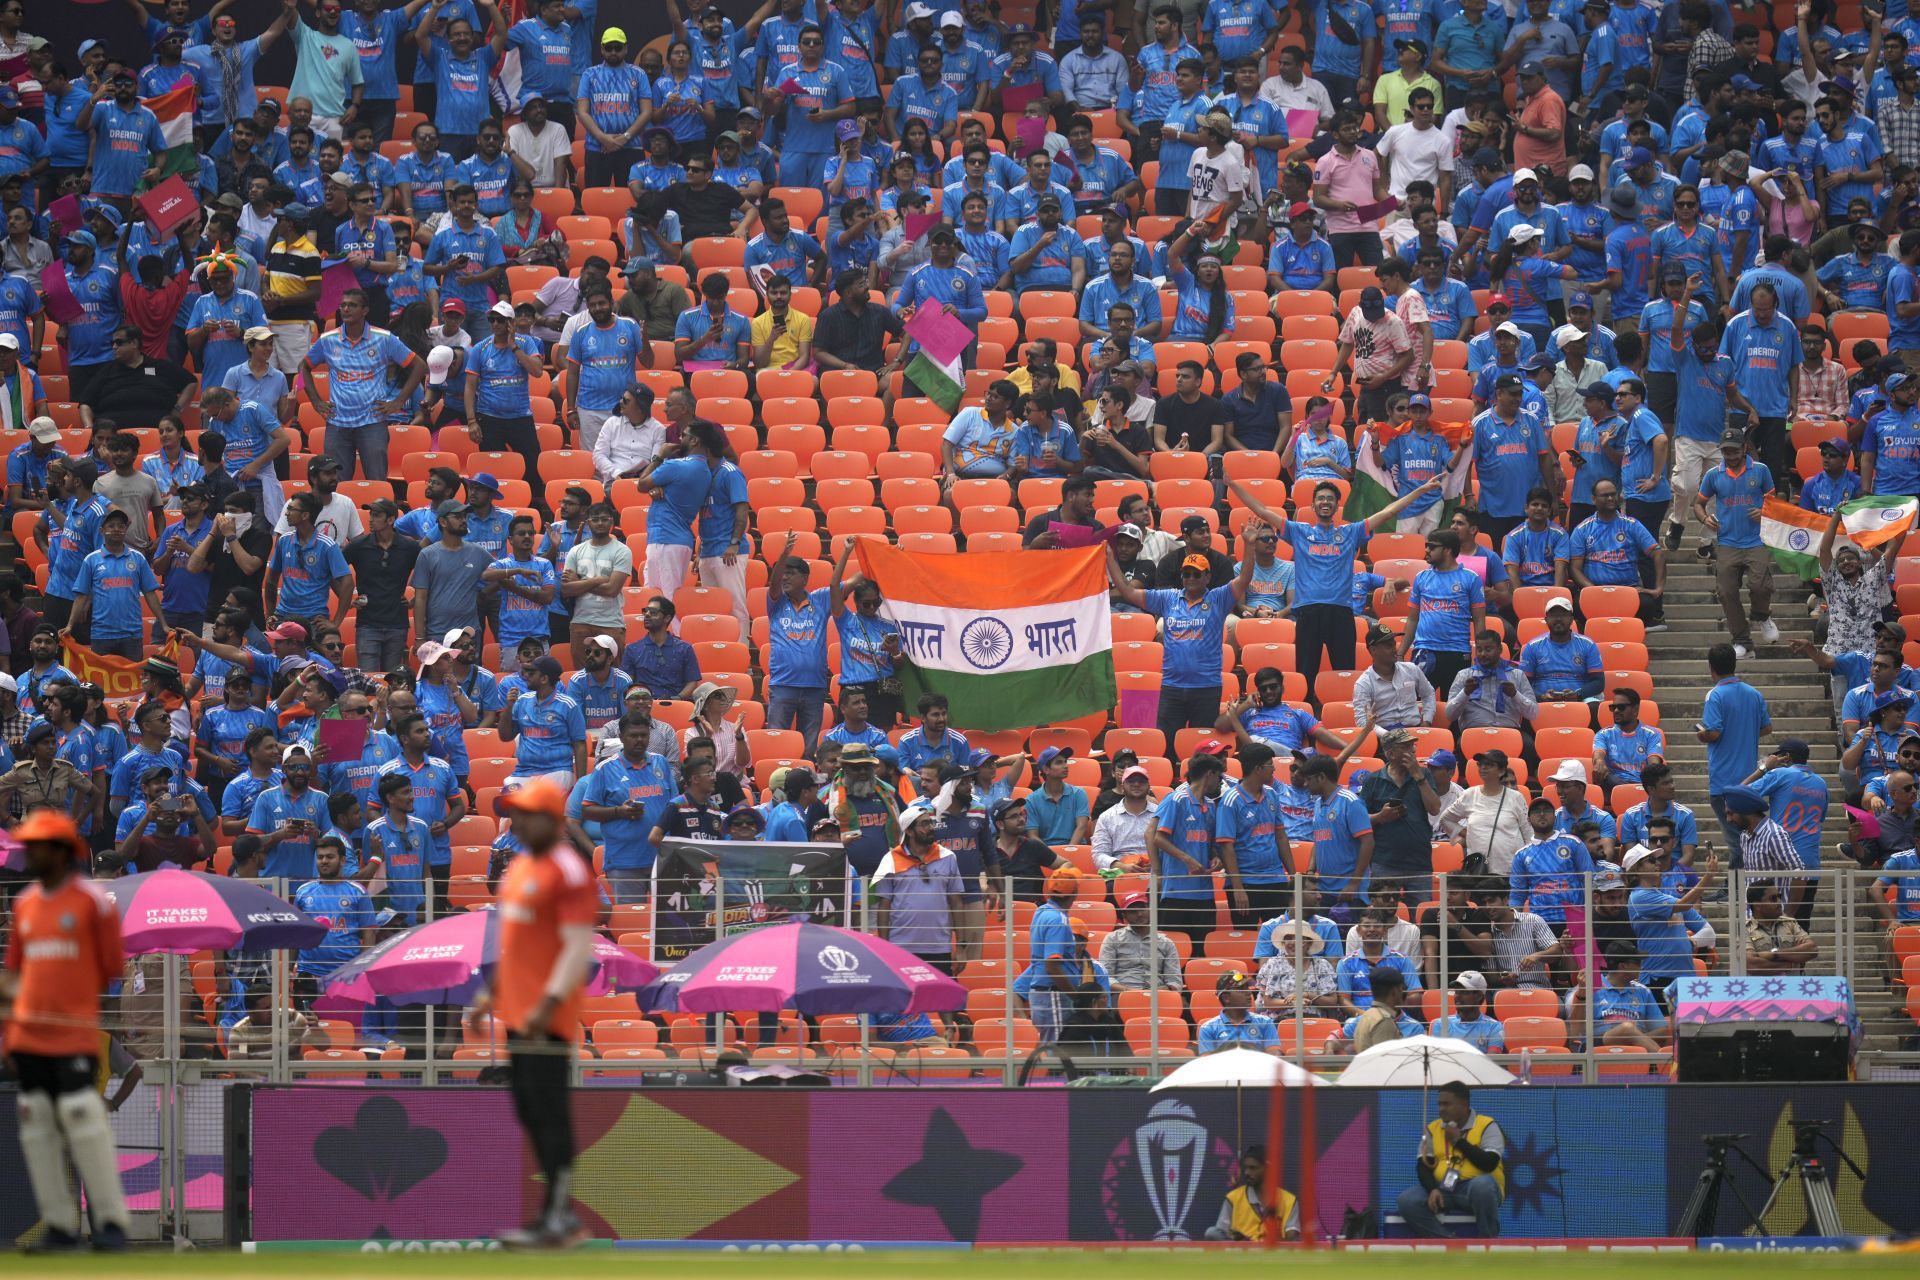 A view of fans at the Narendra Modi Stadium in Ahmedabad. (Pic: AP)